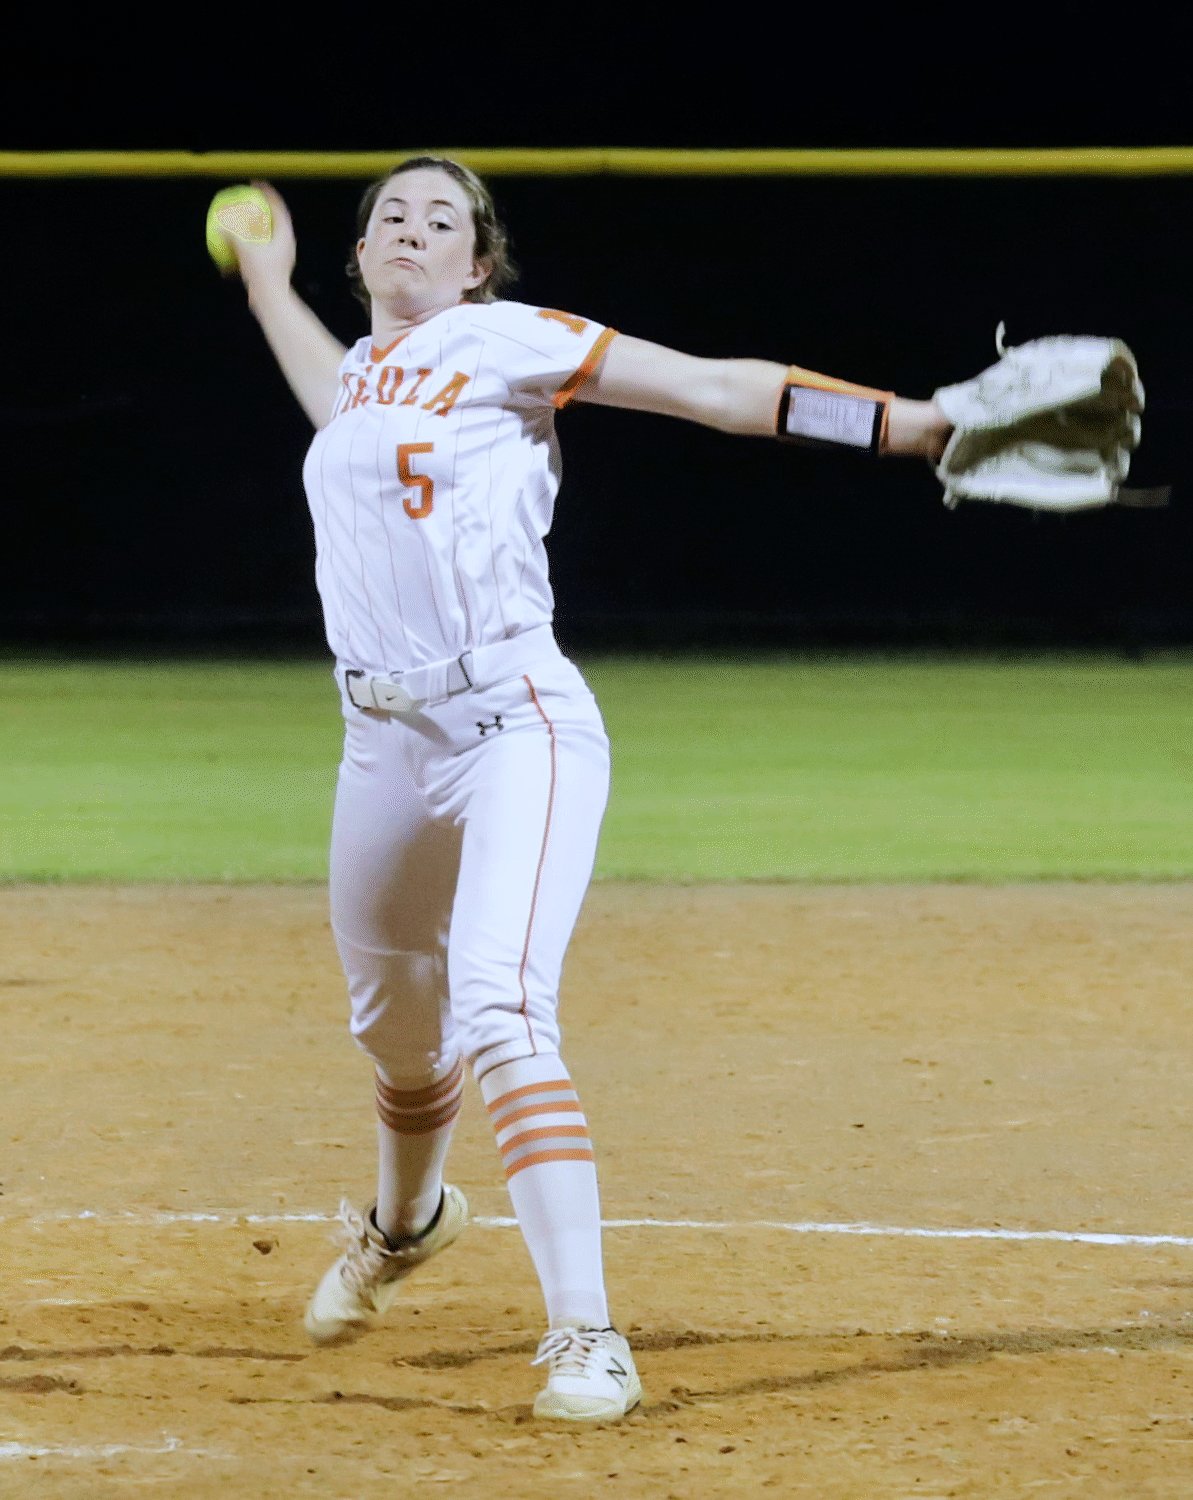 Mineola’s Jayden Marshall tossed a shut-out last Tuesday against Quitman.